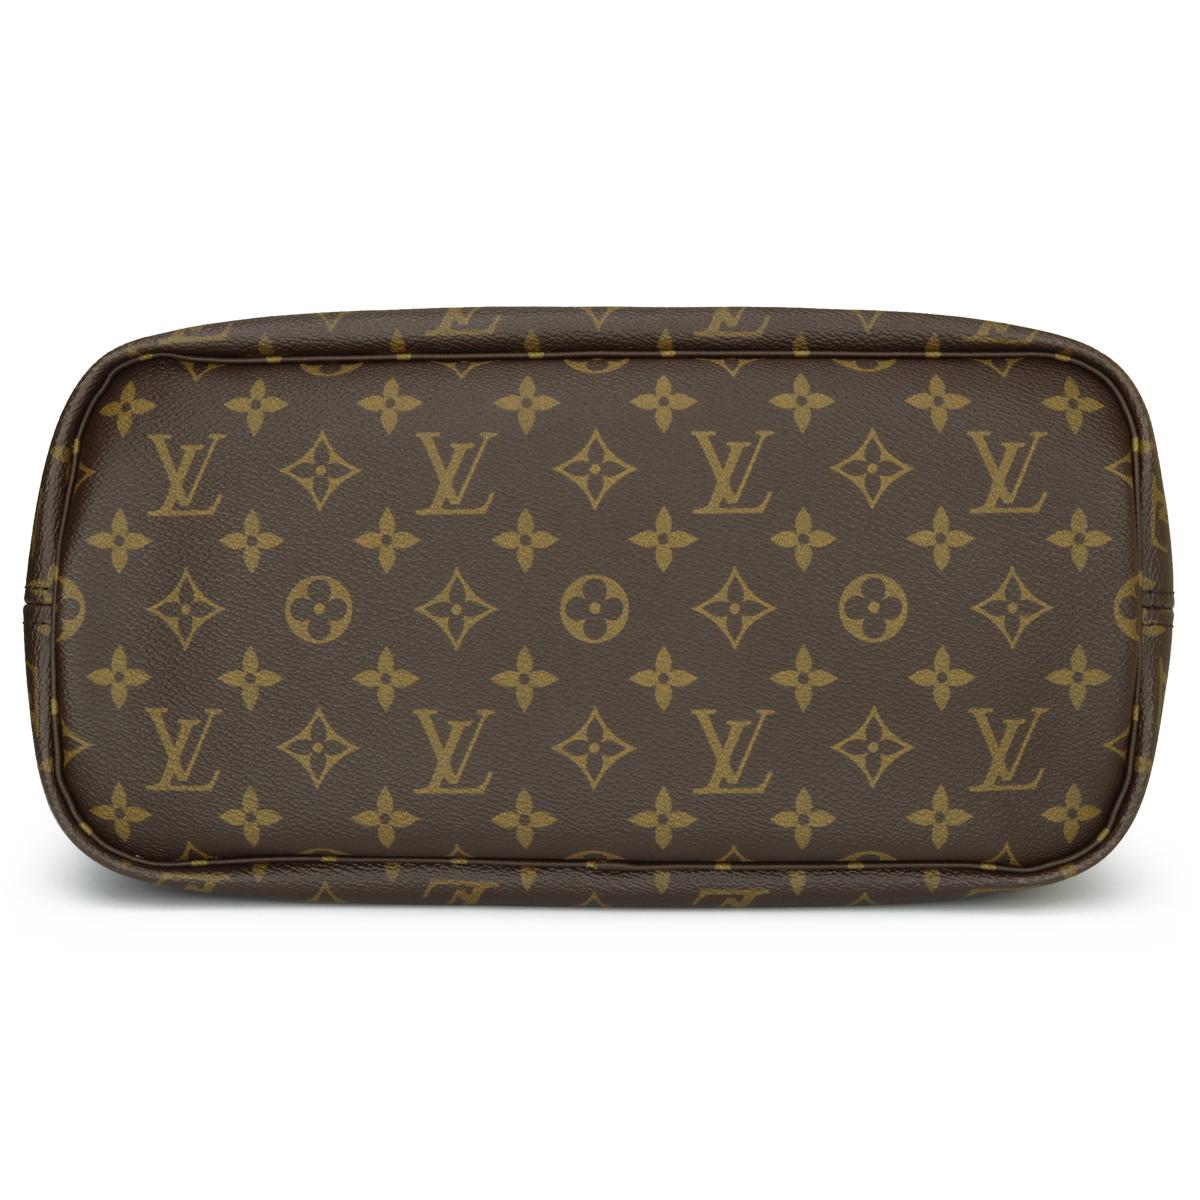 Louis Vuitton World Tour Neverfull Bag MM Monogram with Gold Hardware 2019 1